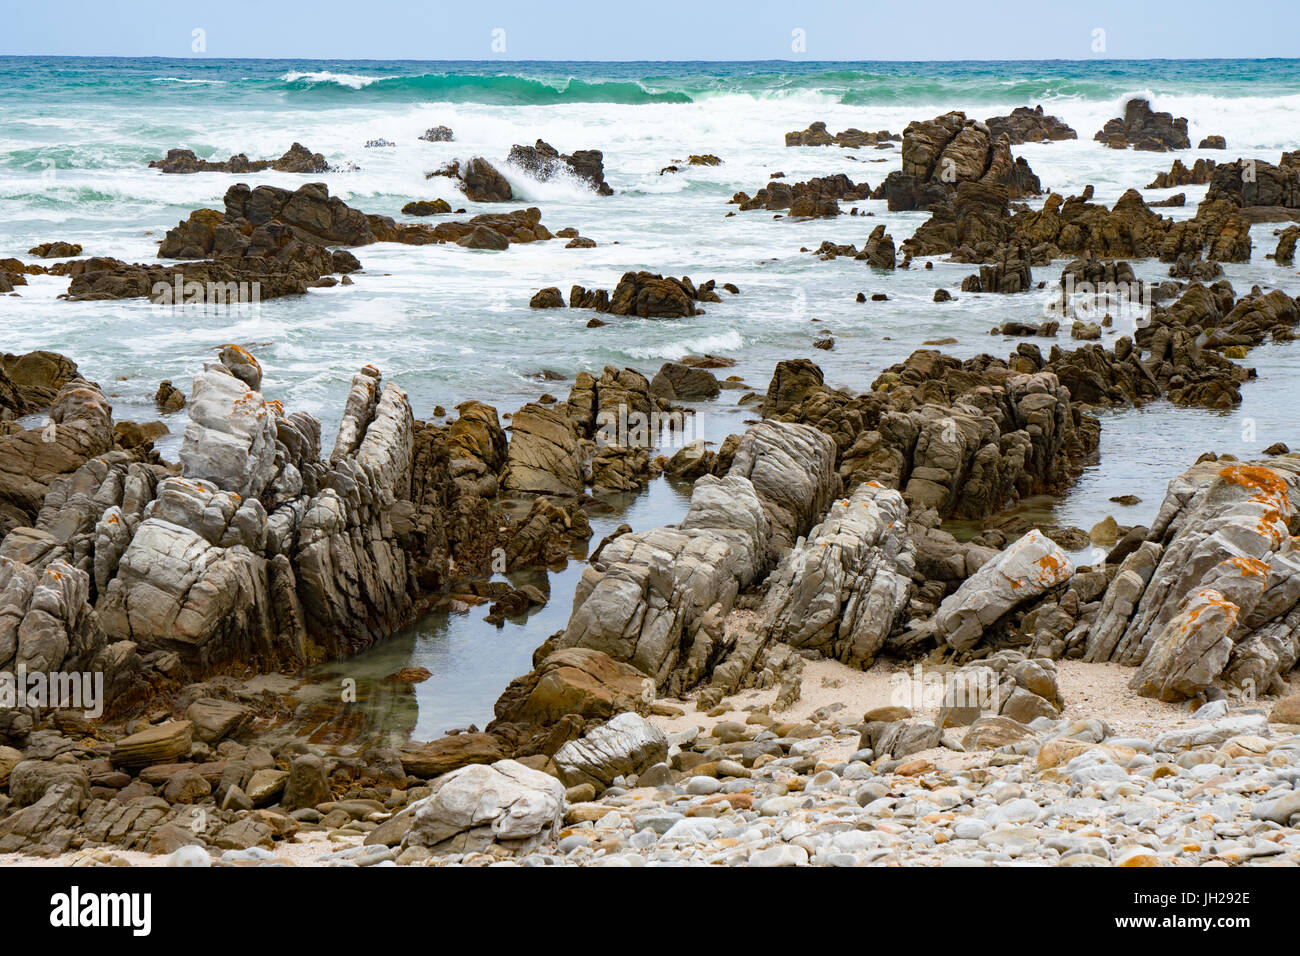 Rocks and bay at the southernmost tip of Africa, Cape Agulhas, Western Cape, South Africa, Africa Stock Photo